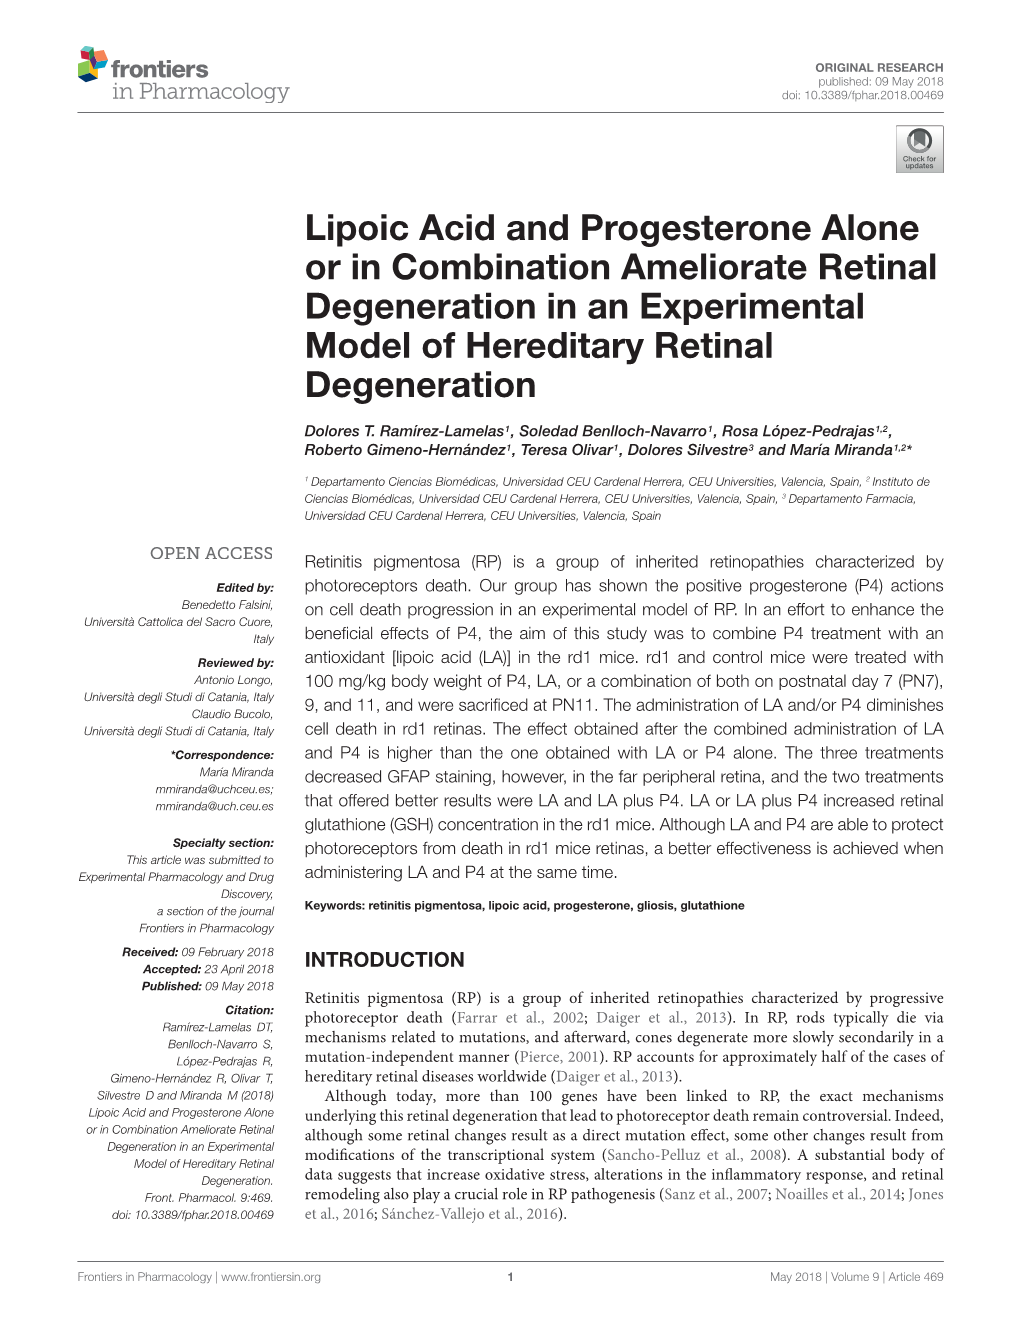 Lipoic Acid and Progesterone Alone Or in Combination Ameliorate Retinal Degeneration in an Experimental Model of Hereditary Retinal Degeneration